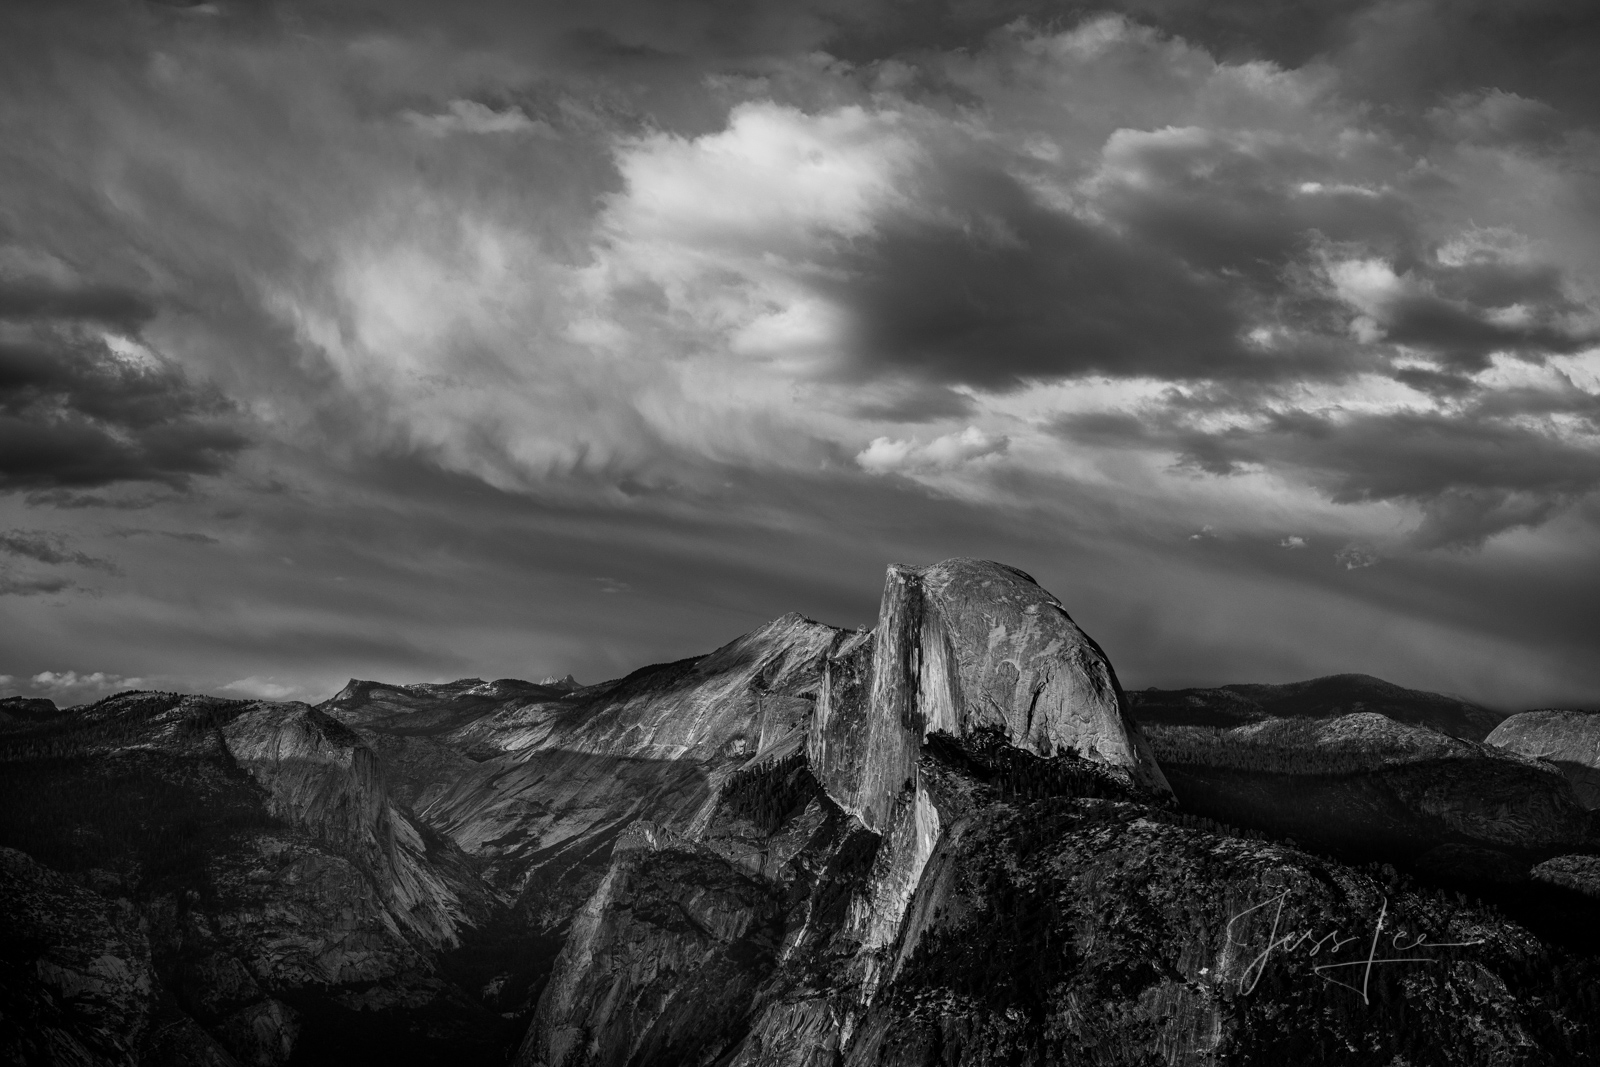 Yosemite Black and White Photography Print of Half Dome from Inspiration Point. Limited to 200 fine art high resolution  prints...